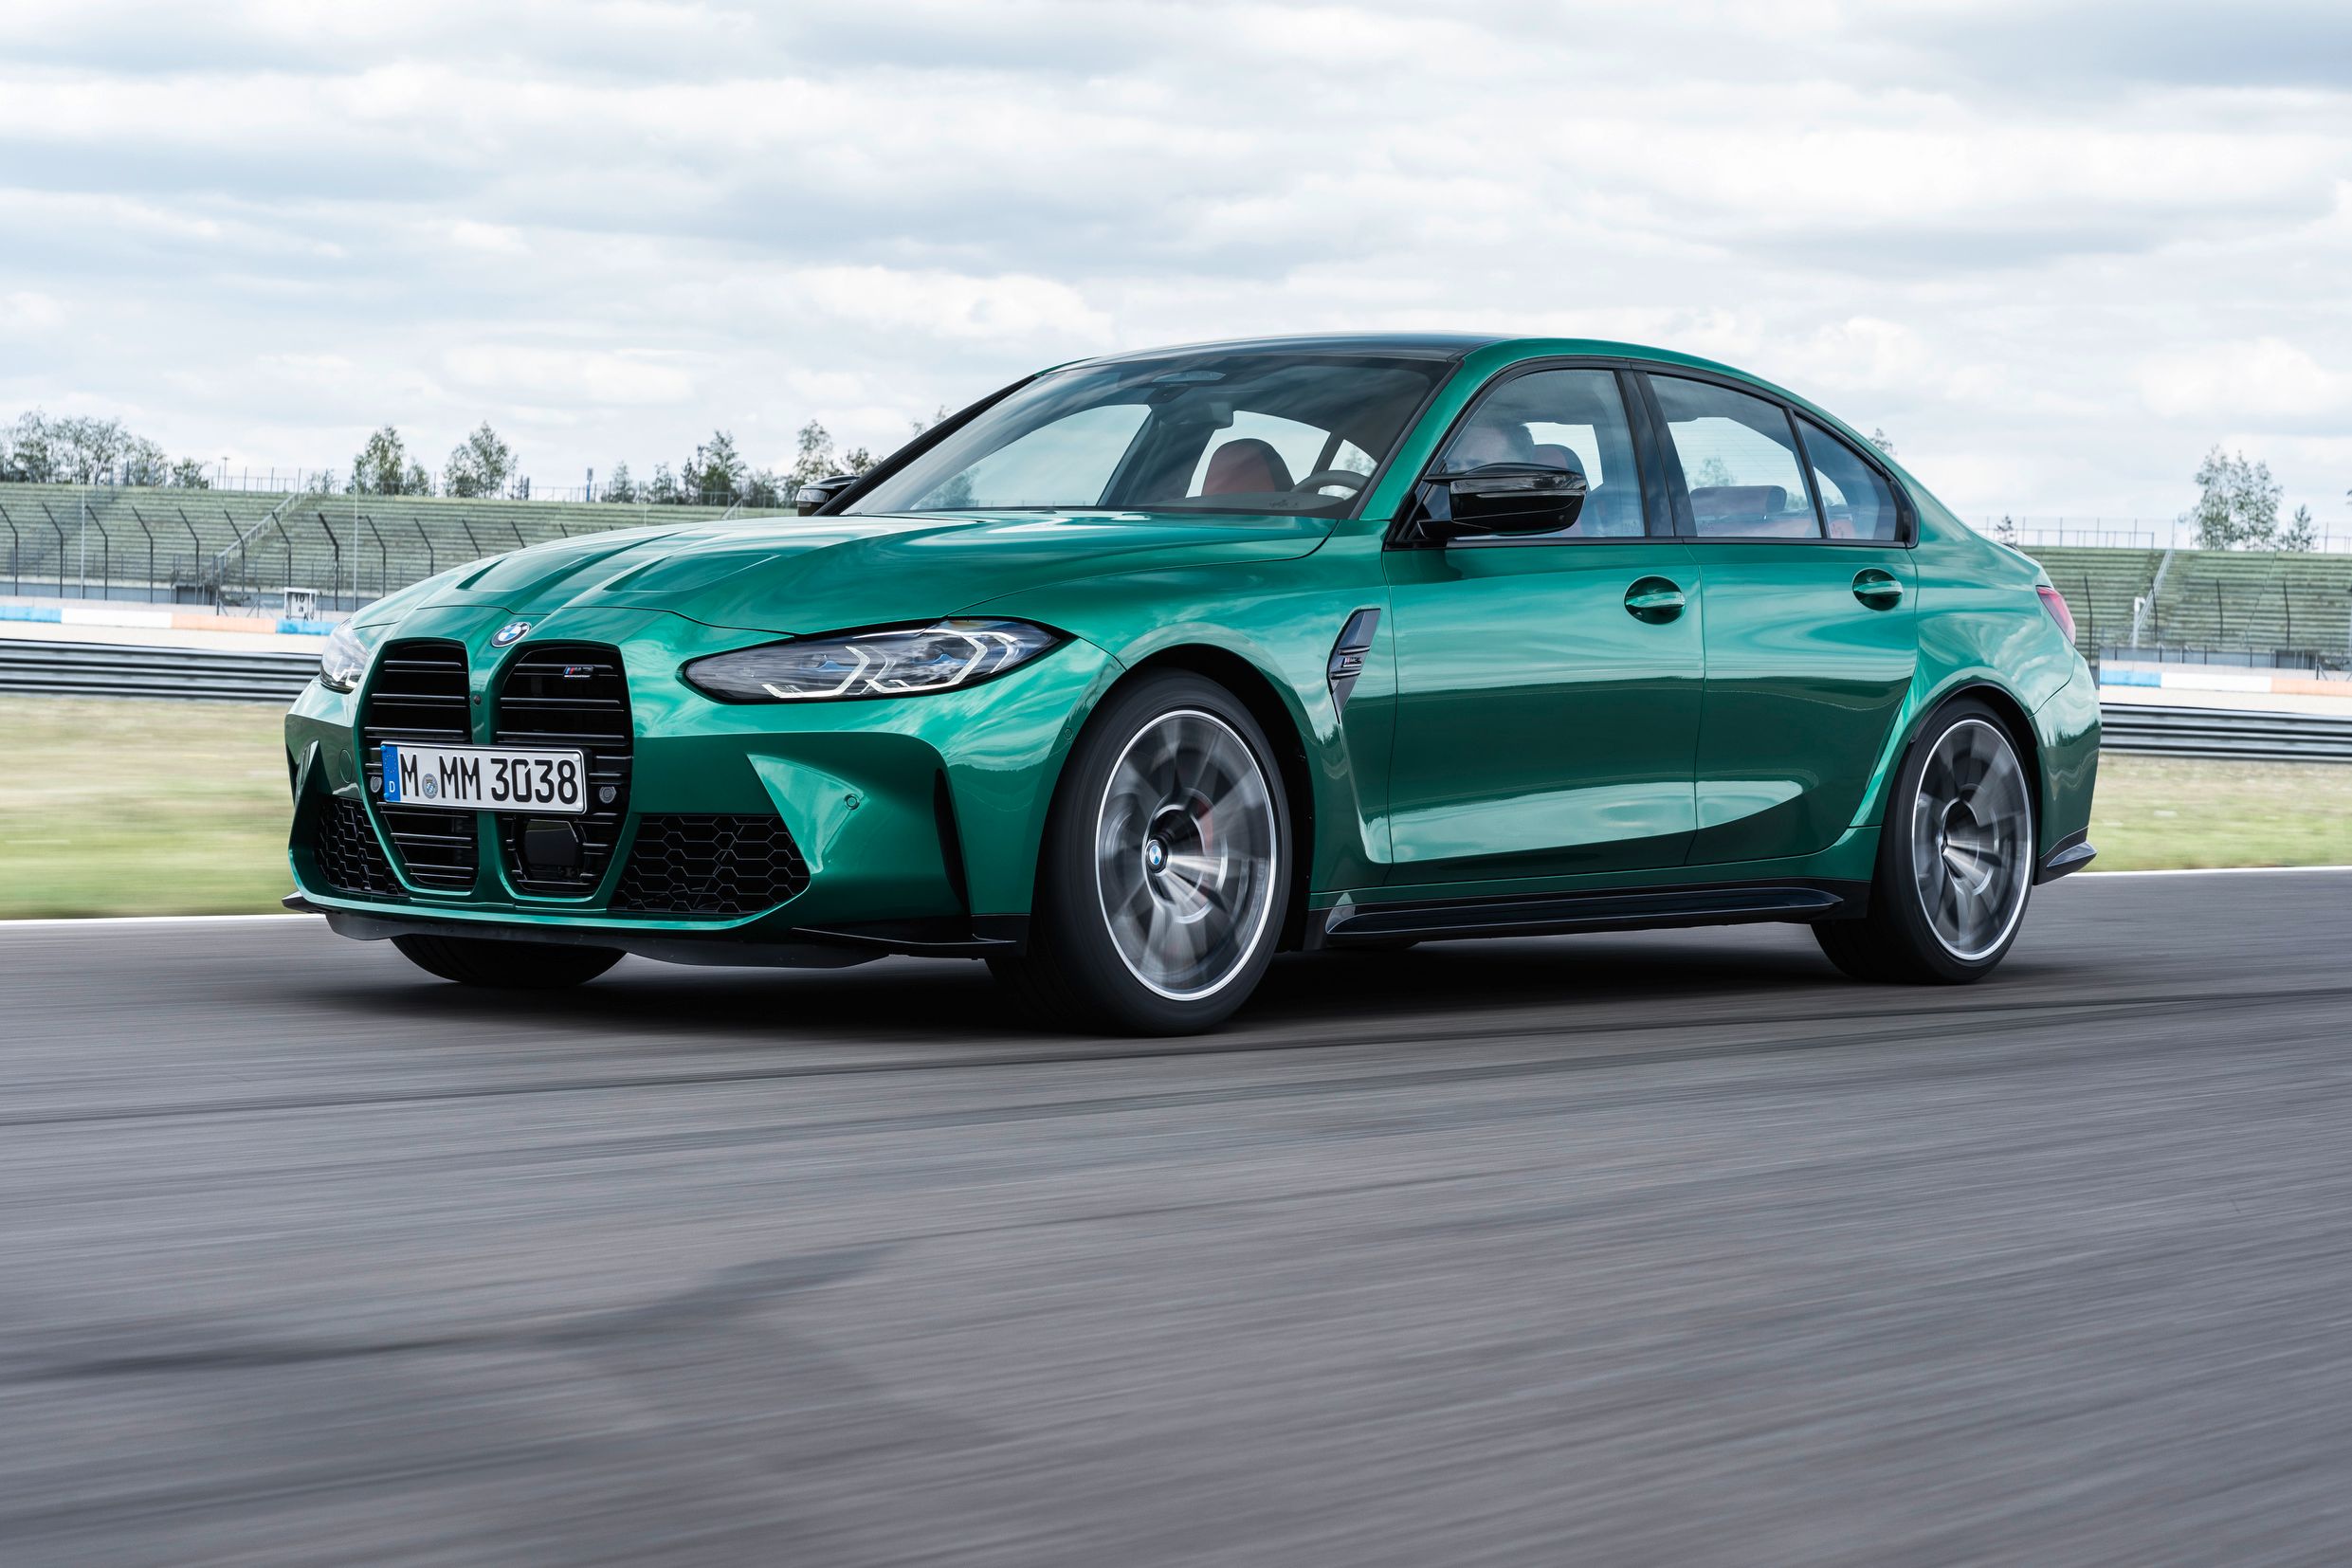 2021 The 2021 BMW M3 Debuts With Massive Kidney Grille, Up To 503 Horsepower, And AWD